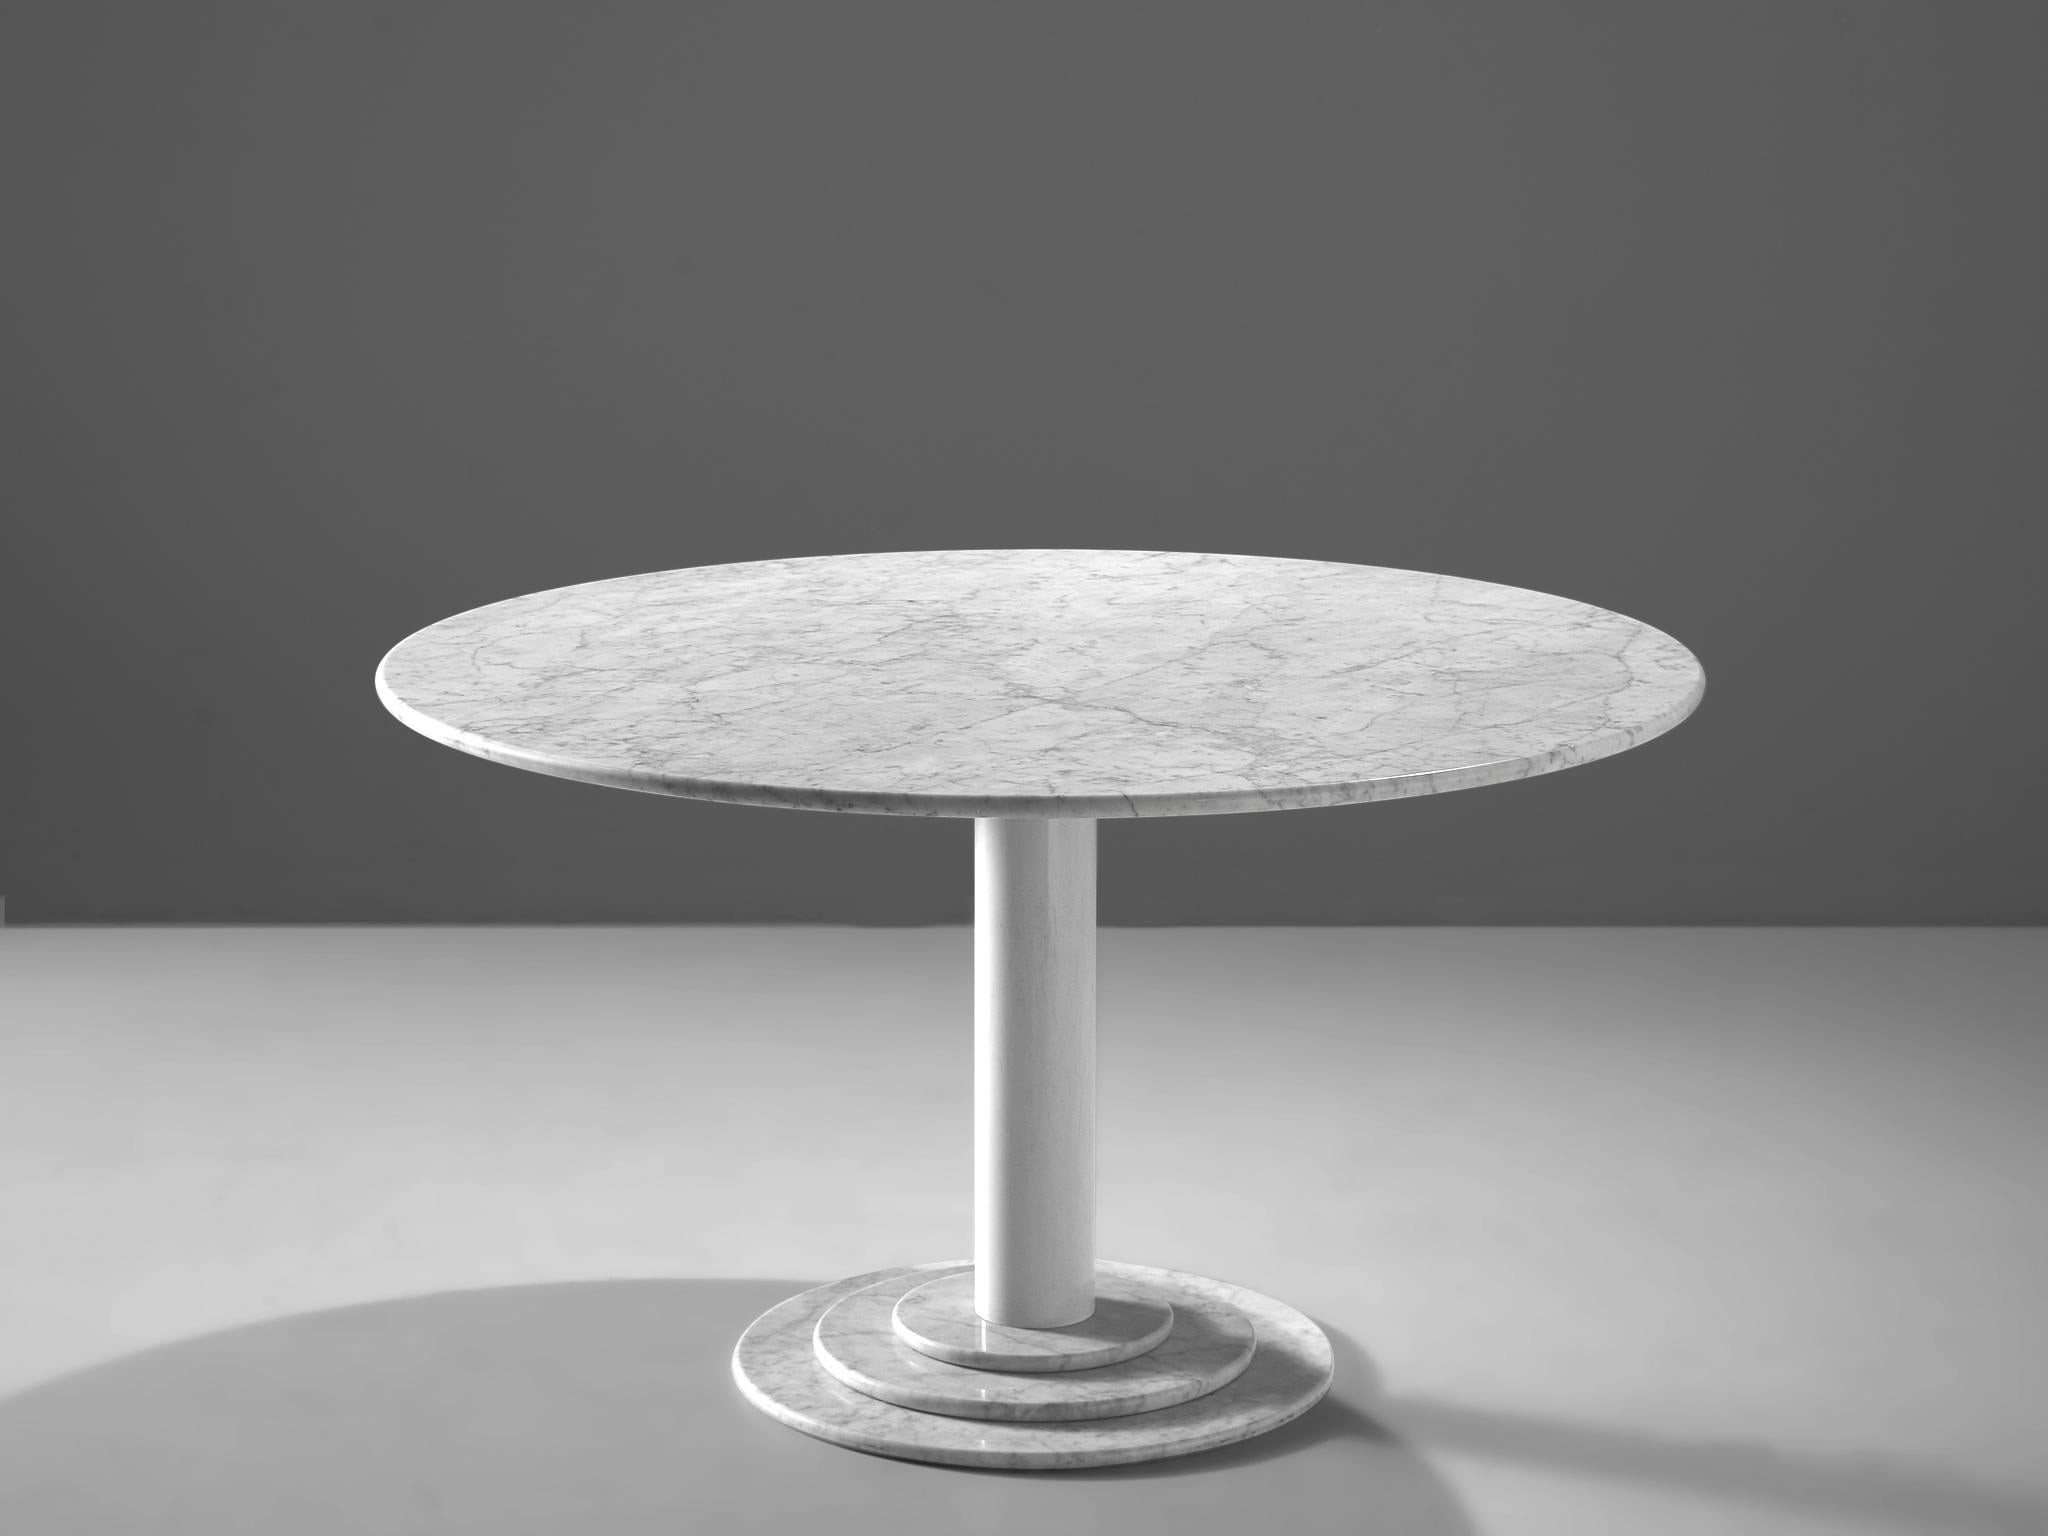 Round dining table, white marble, Italy, 1970s

This table is a skillful example of Postmodern design. A white lacquered metal pedestal with a marble foot holds a minimalistic marble tabletop. A great Classic designed in the style of Acerbis. The